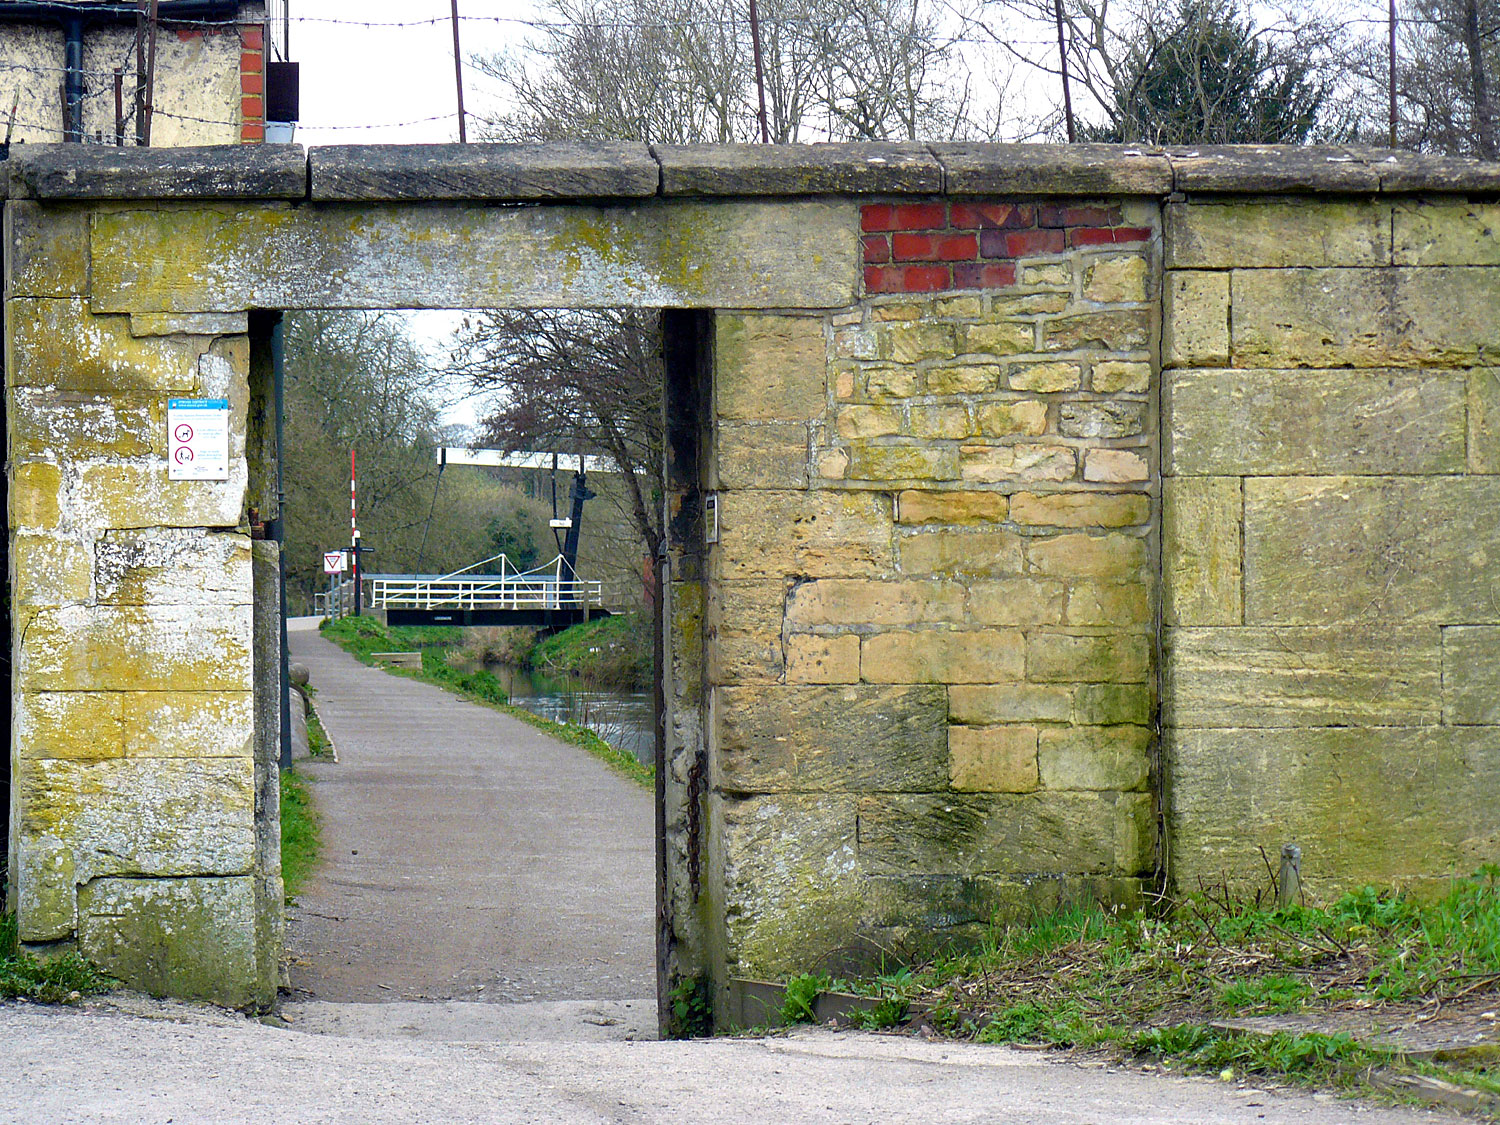 Surviving gateway at the eastern end of the wharf.